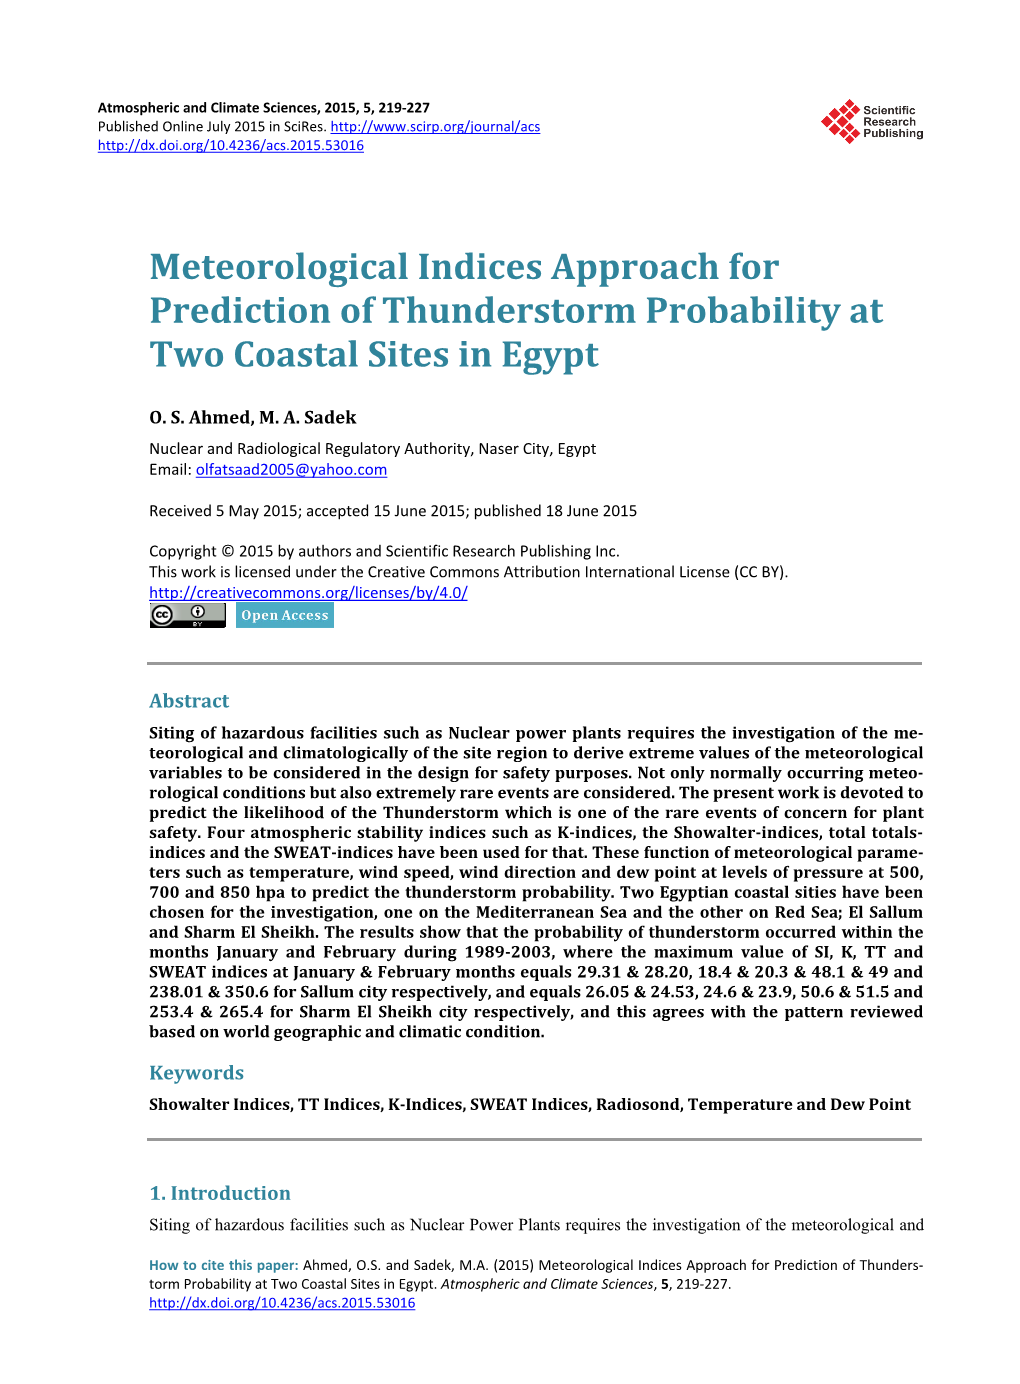 Meteorological Indices Approach for Prediction of Thunderstorm Probability at Two Coastal Sites in Egypt